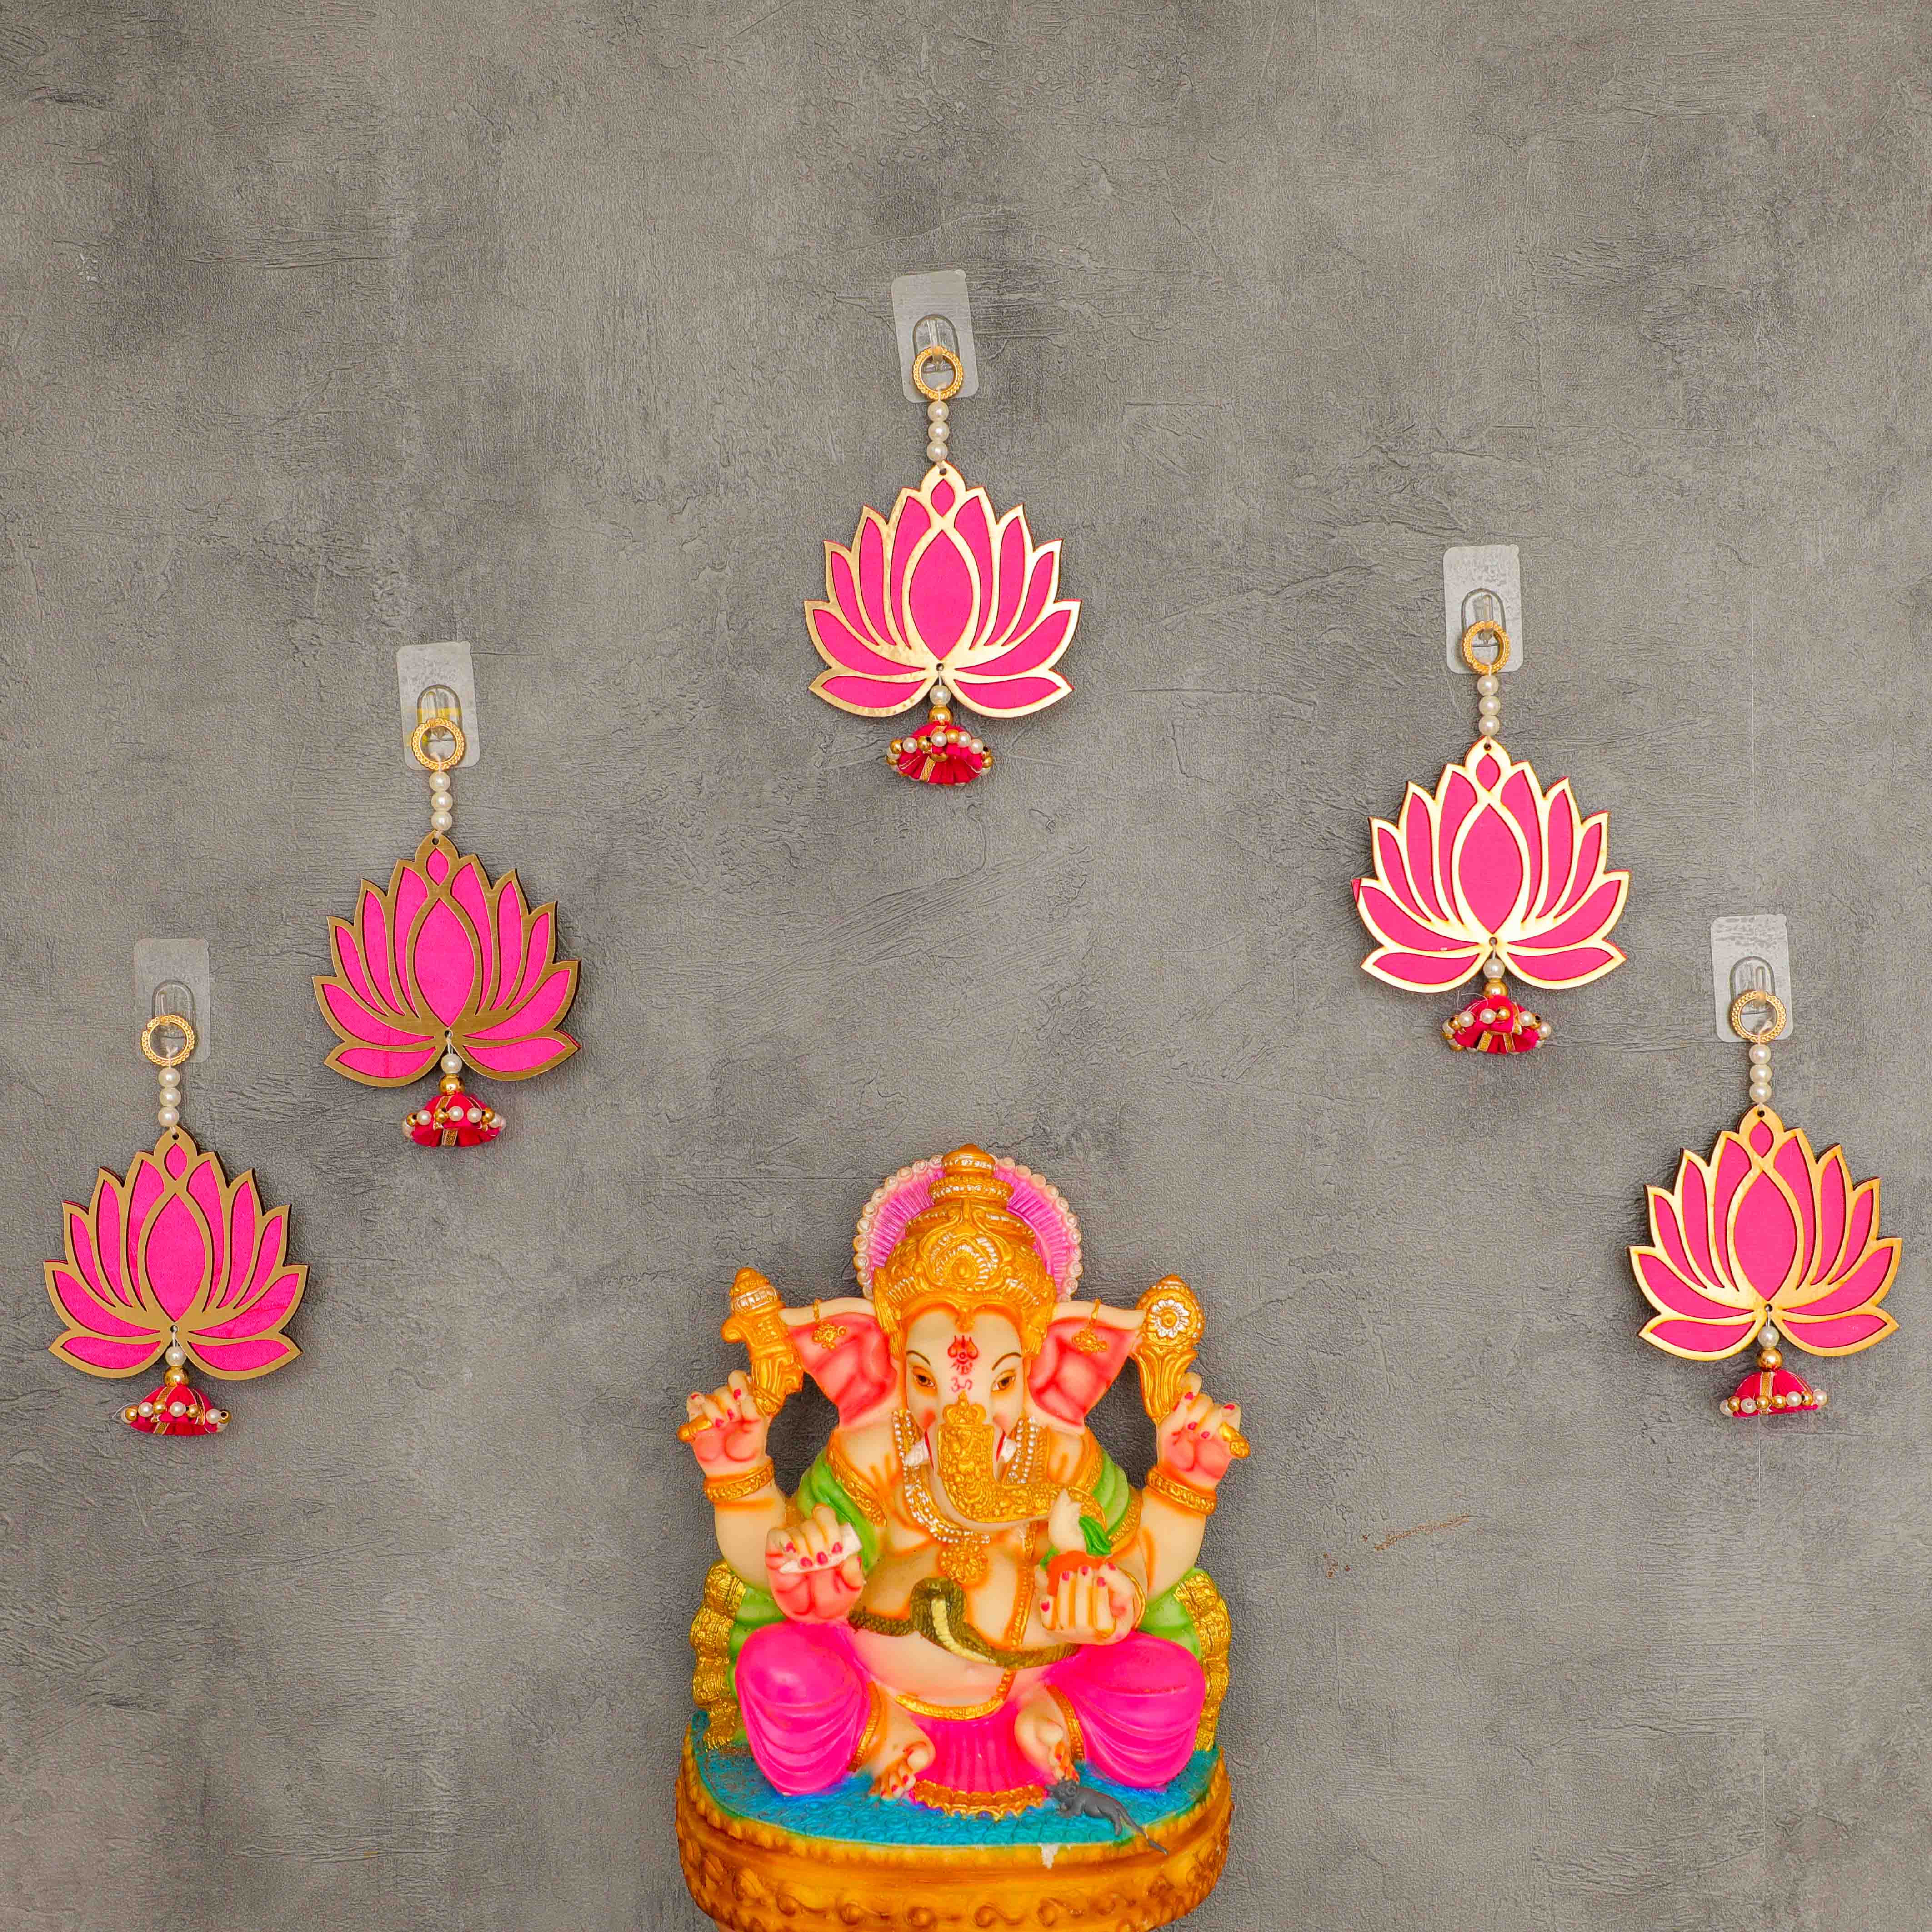 Light up the ambience and enhance your celebrations with this eye catching decorative set.